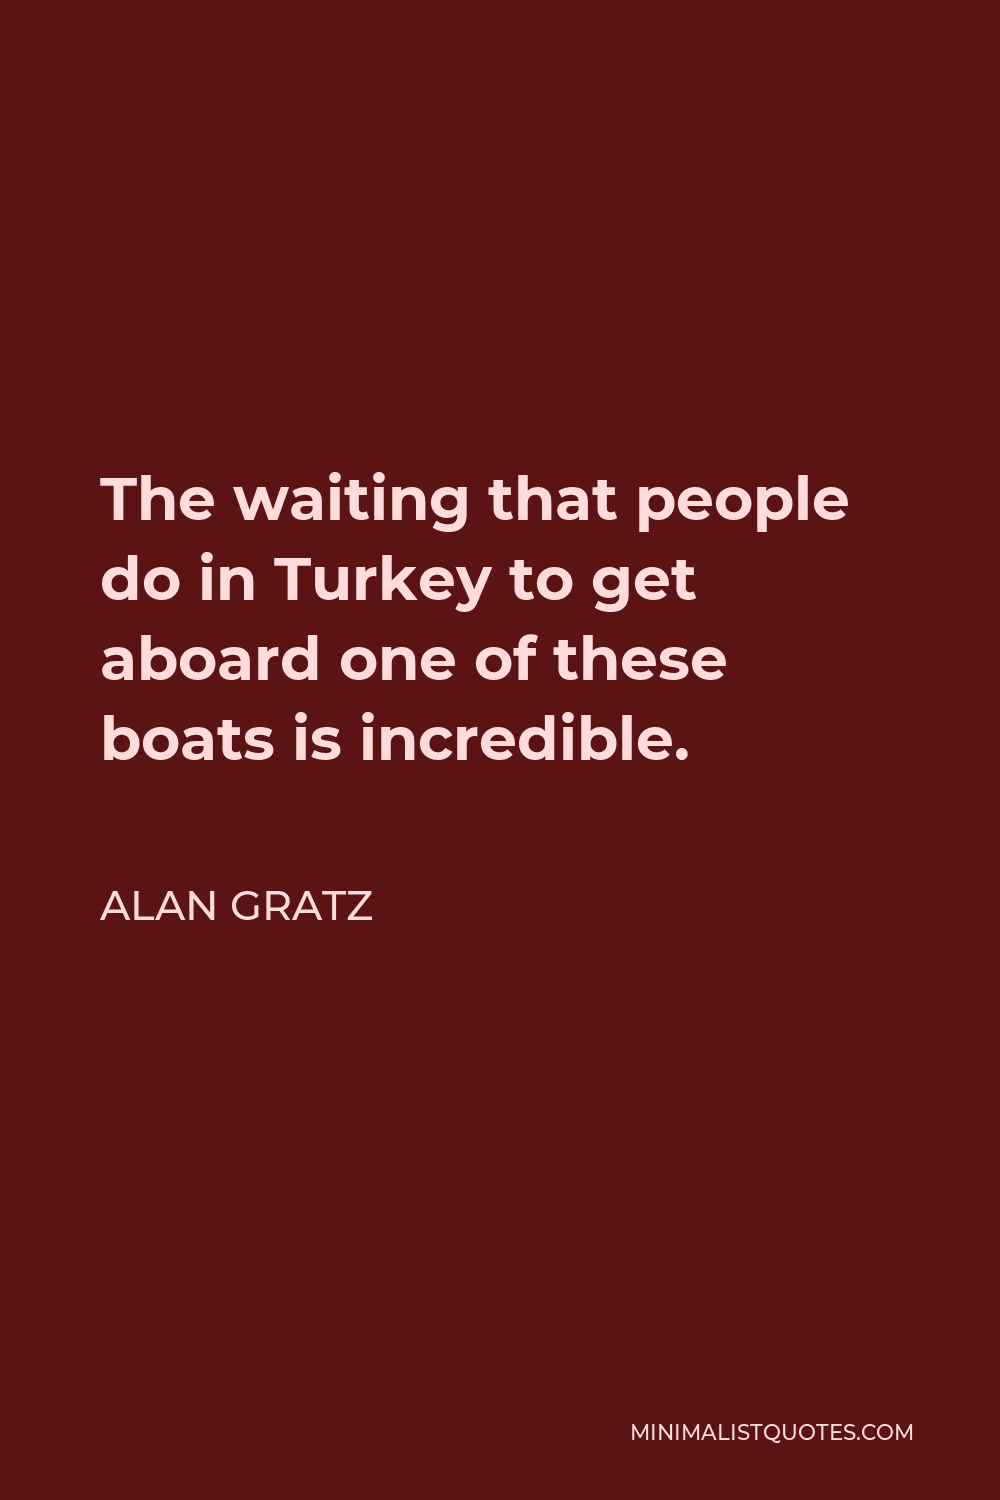 Alan Gratz Quote - The waiting that people do in Turkey to get aboard one of these boats is incredible.